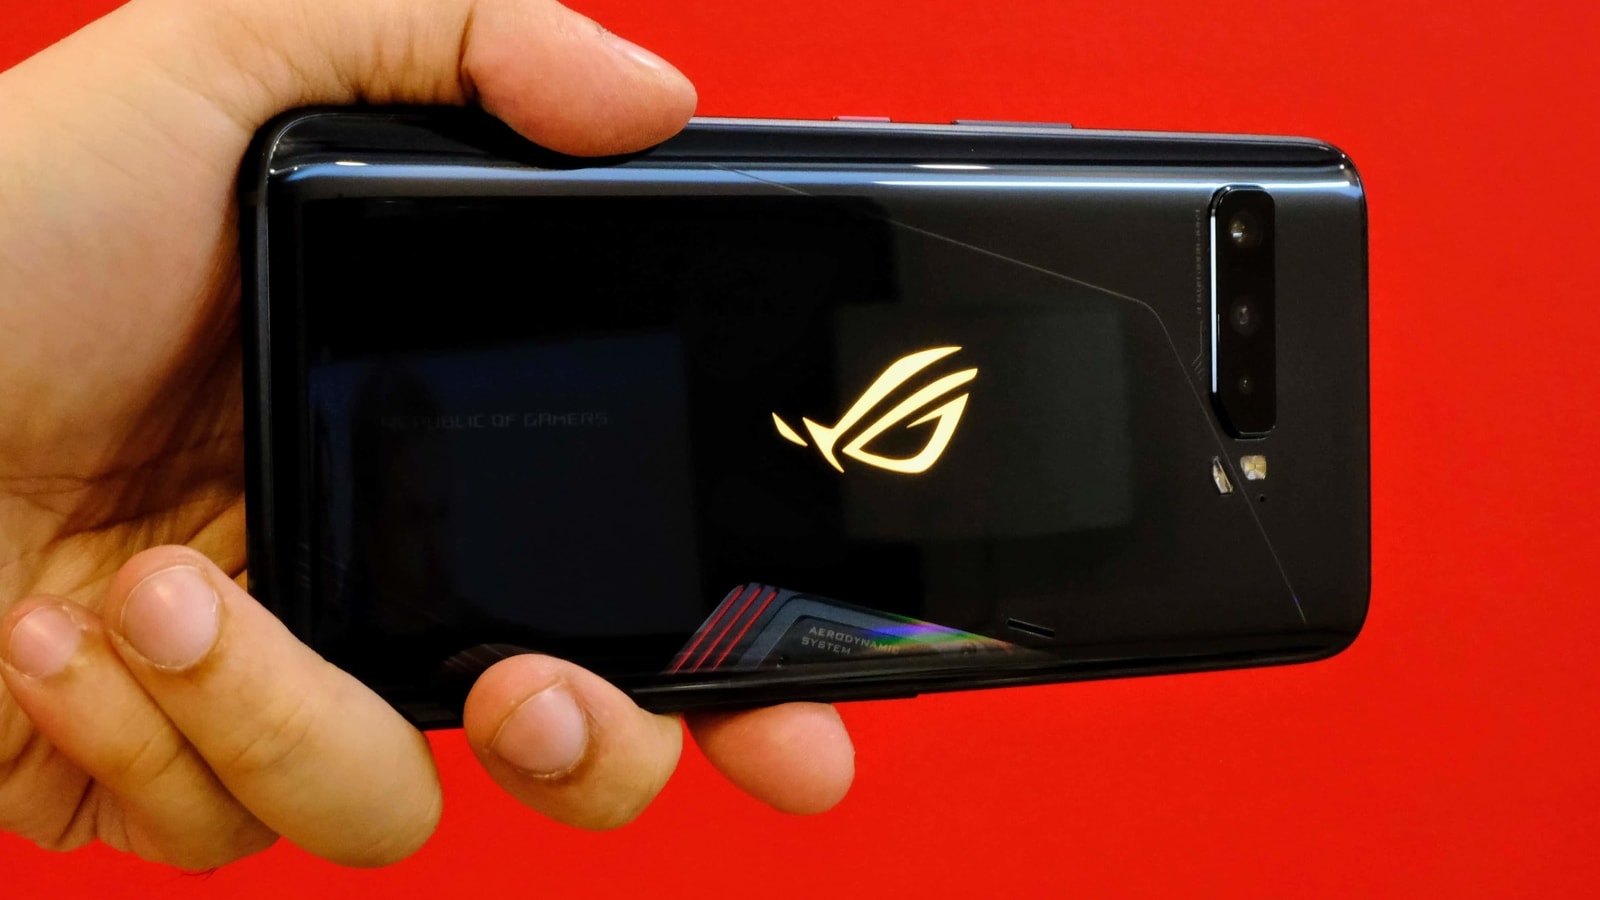 Here’s what we know about Asus ROG Phone 4 so far